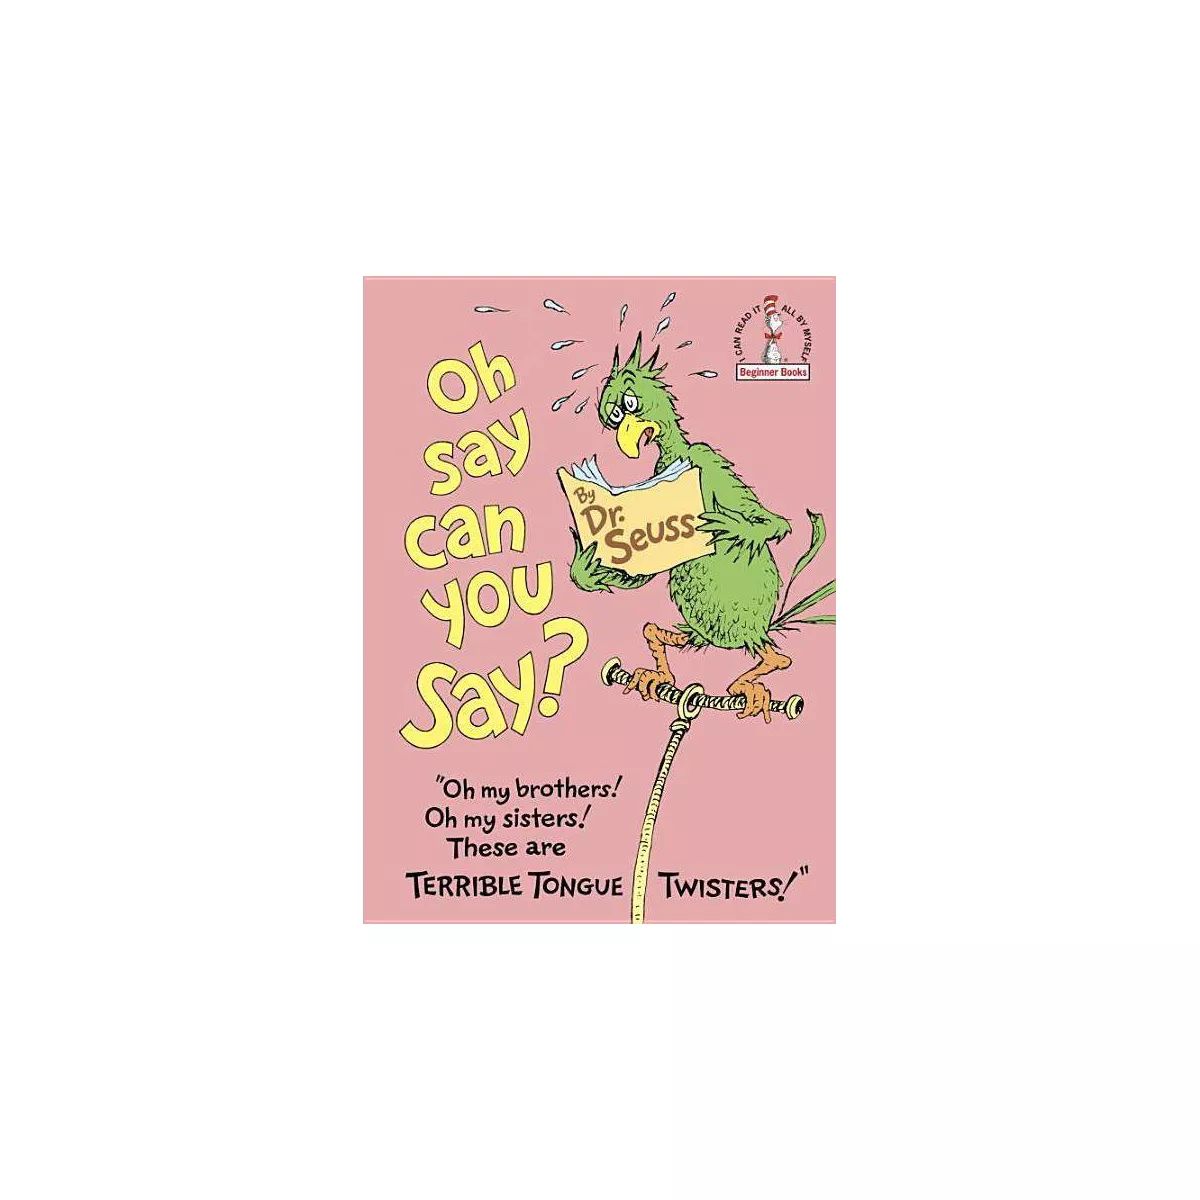 Oh Say Can You Say? (Beginner Books)(Hardcover) by Dr. Seuss | Target